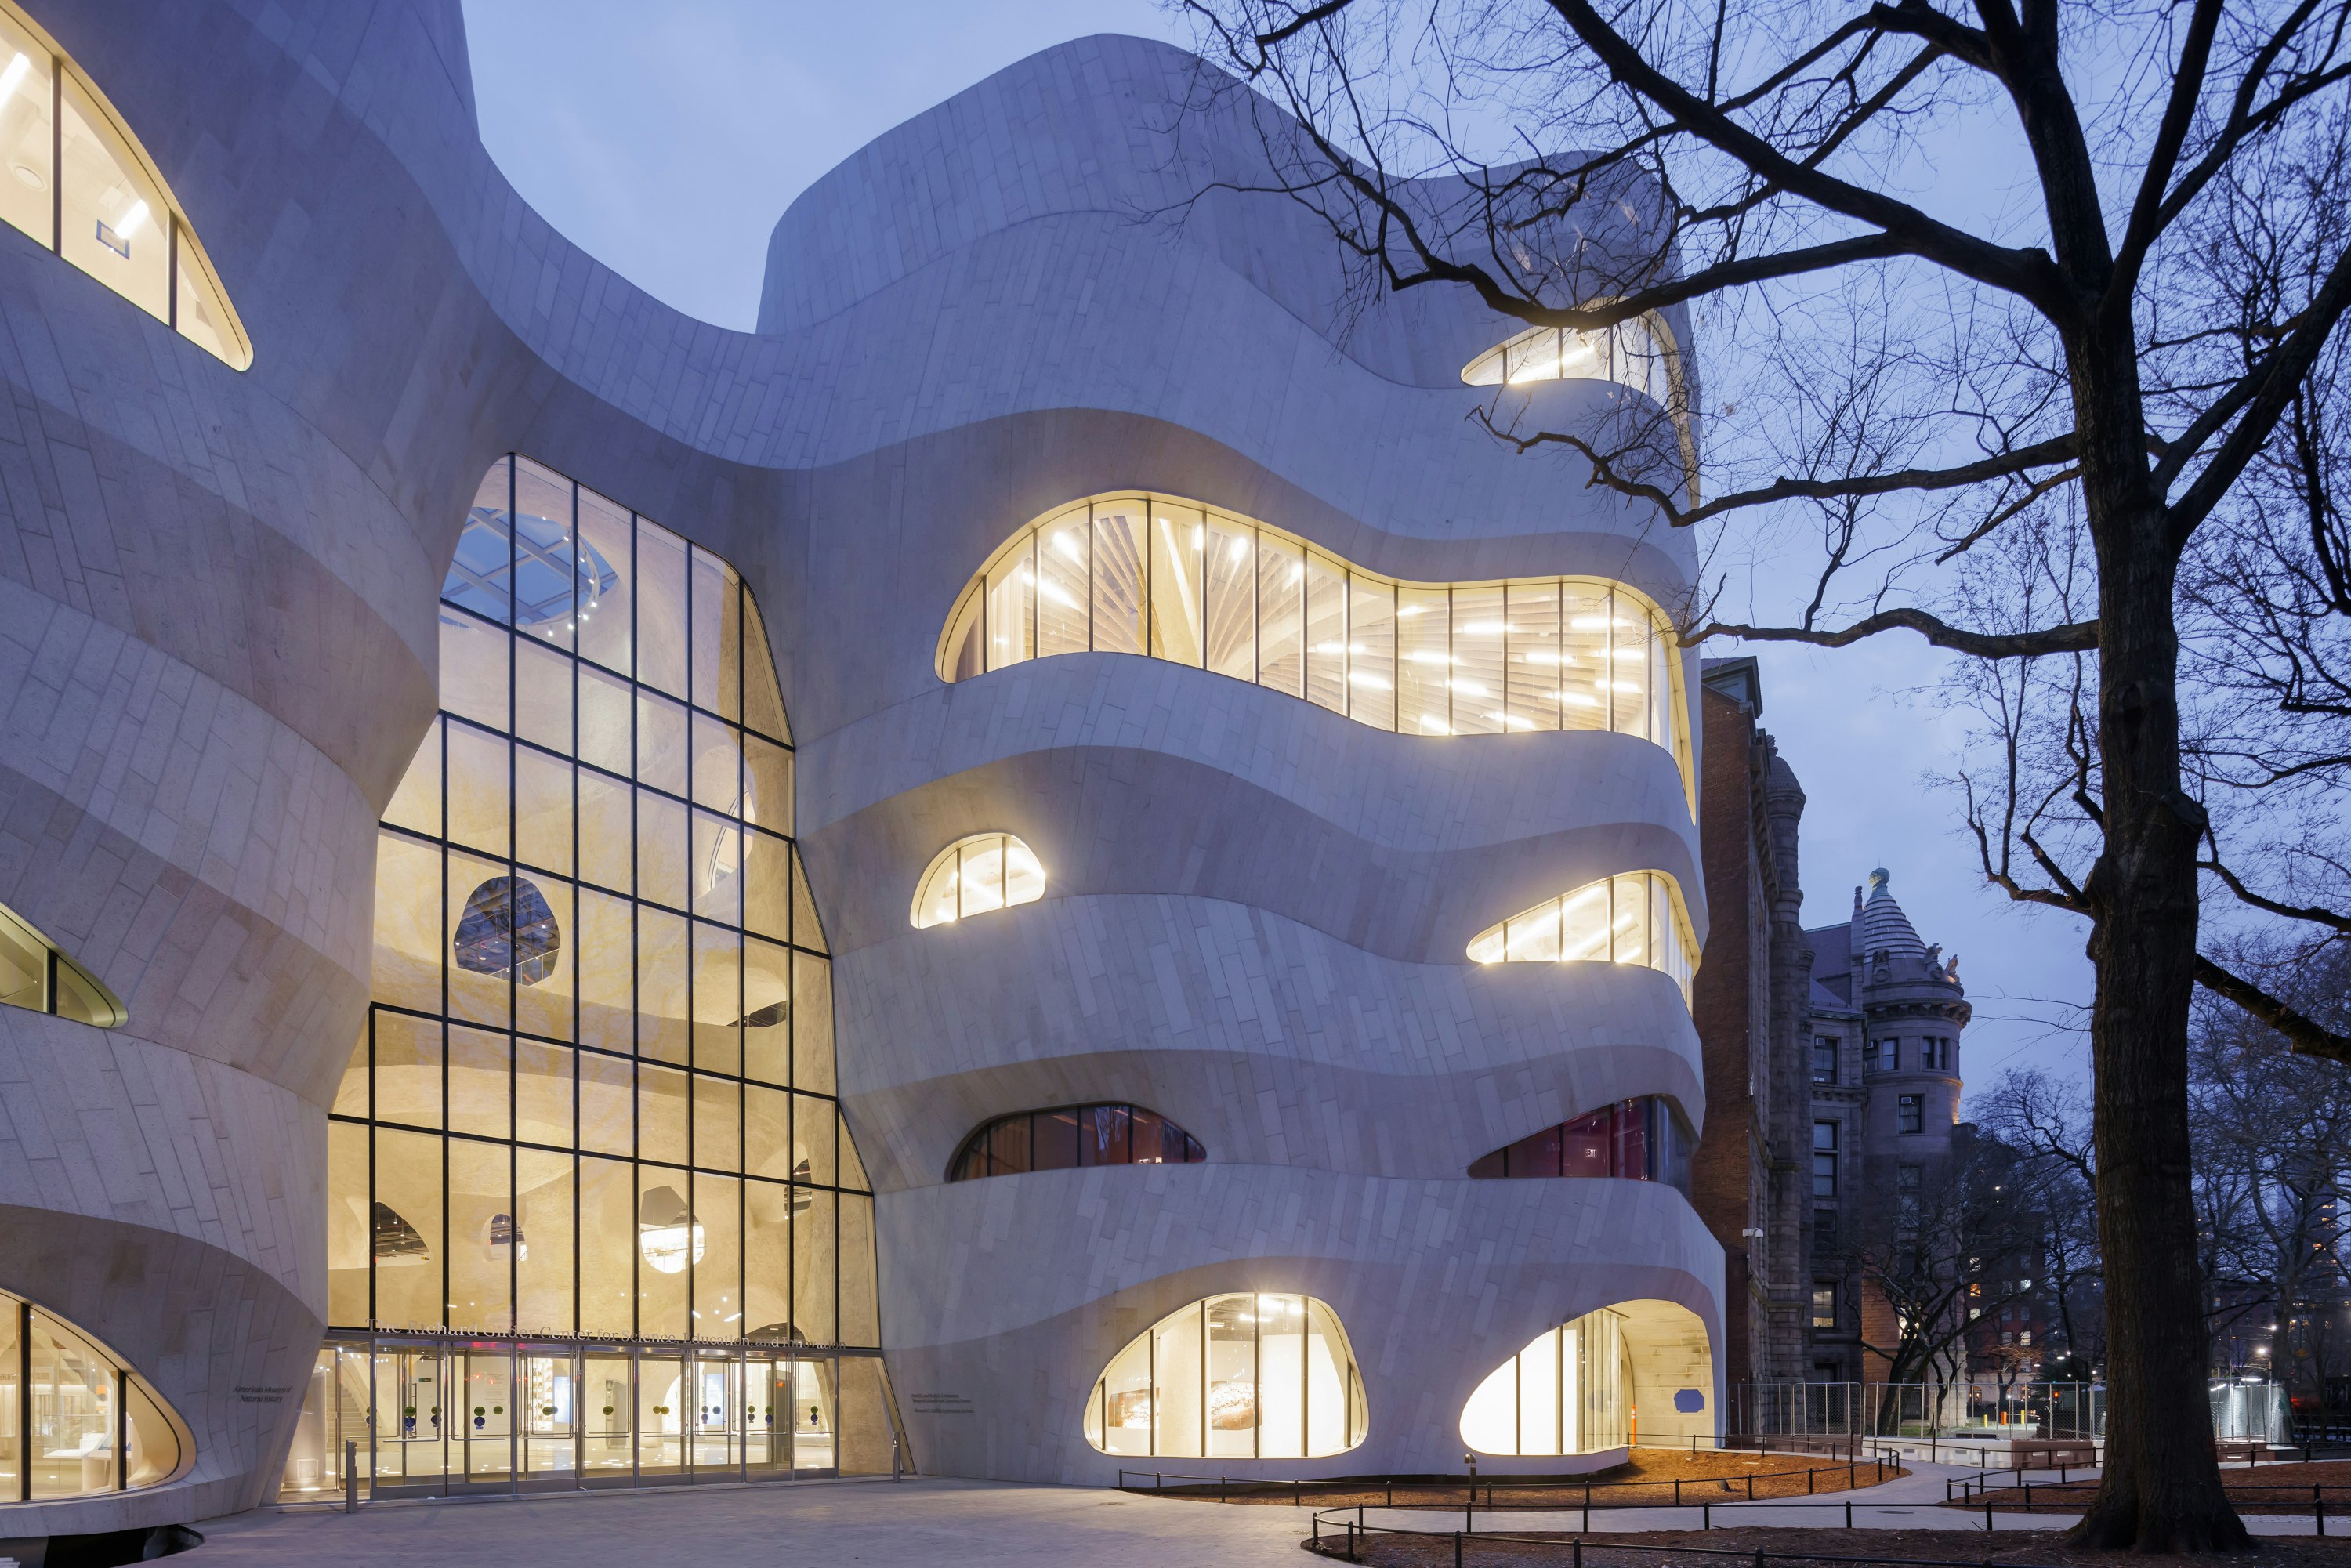 At dusk, the curved windows of the Richard Gilder Center for Science, Education, and Innovation exude an inviting soft glow, American Museum of Natural History, New York City, New York, USA